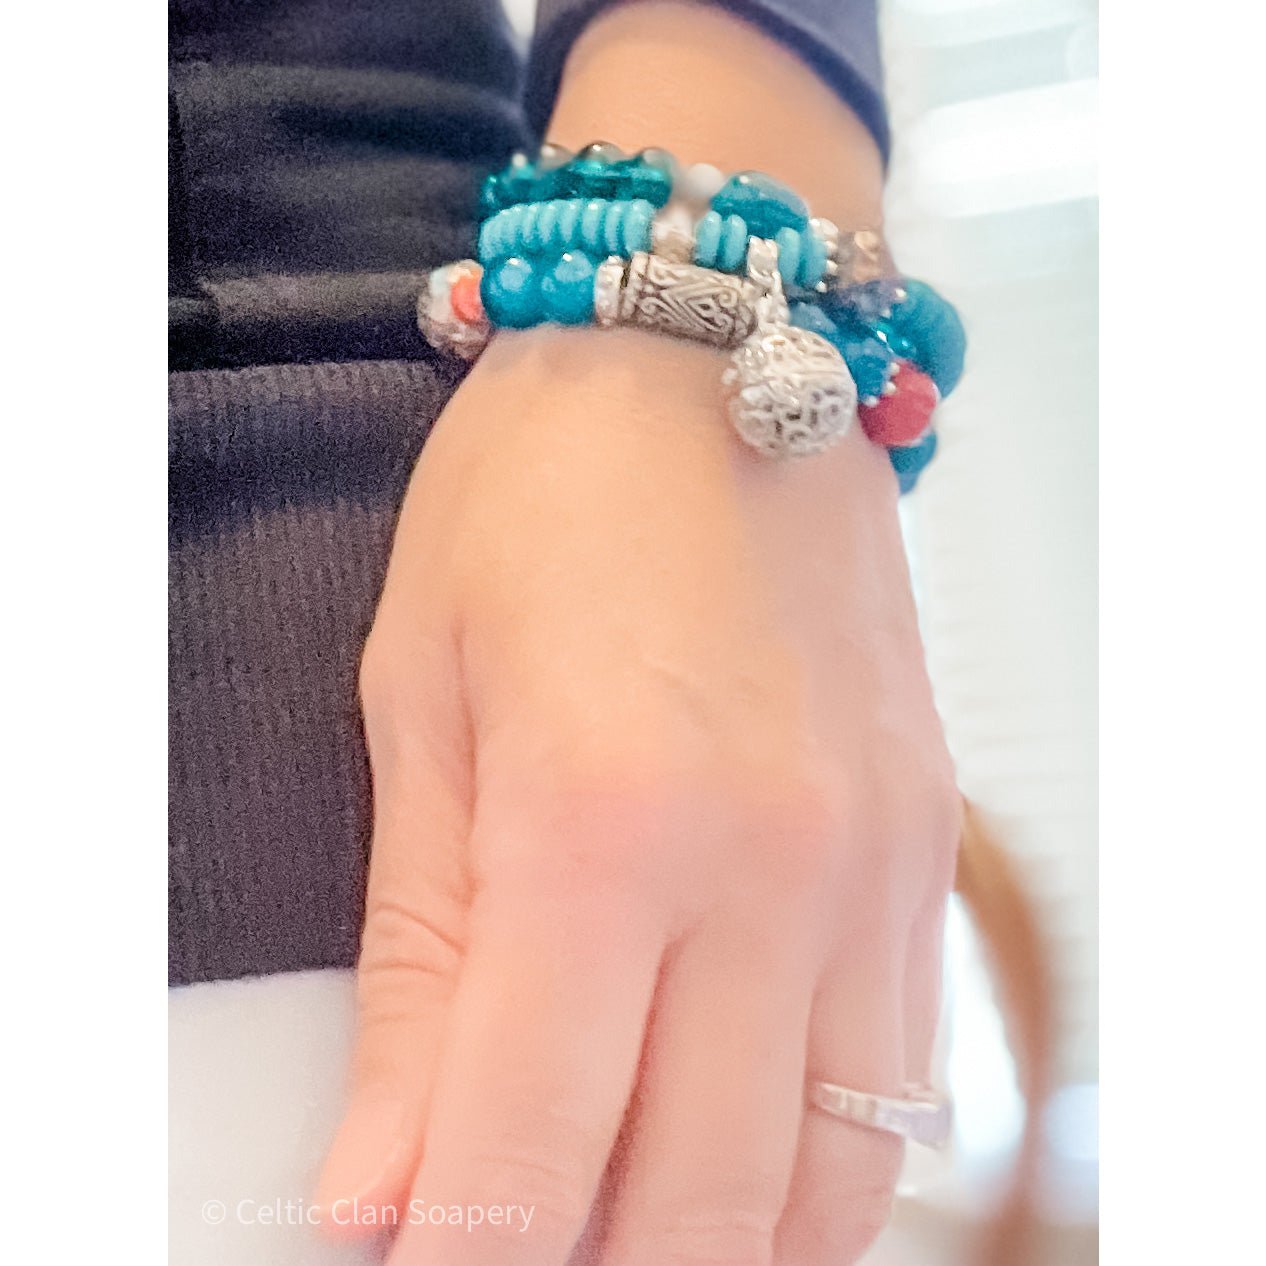 Aromatherapy Diffuser Bracelets | Essential Oil Jewelry - Celtic Clan Soapery LLC